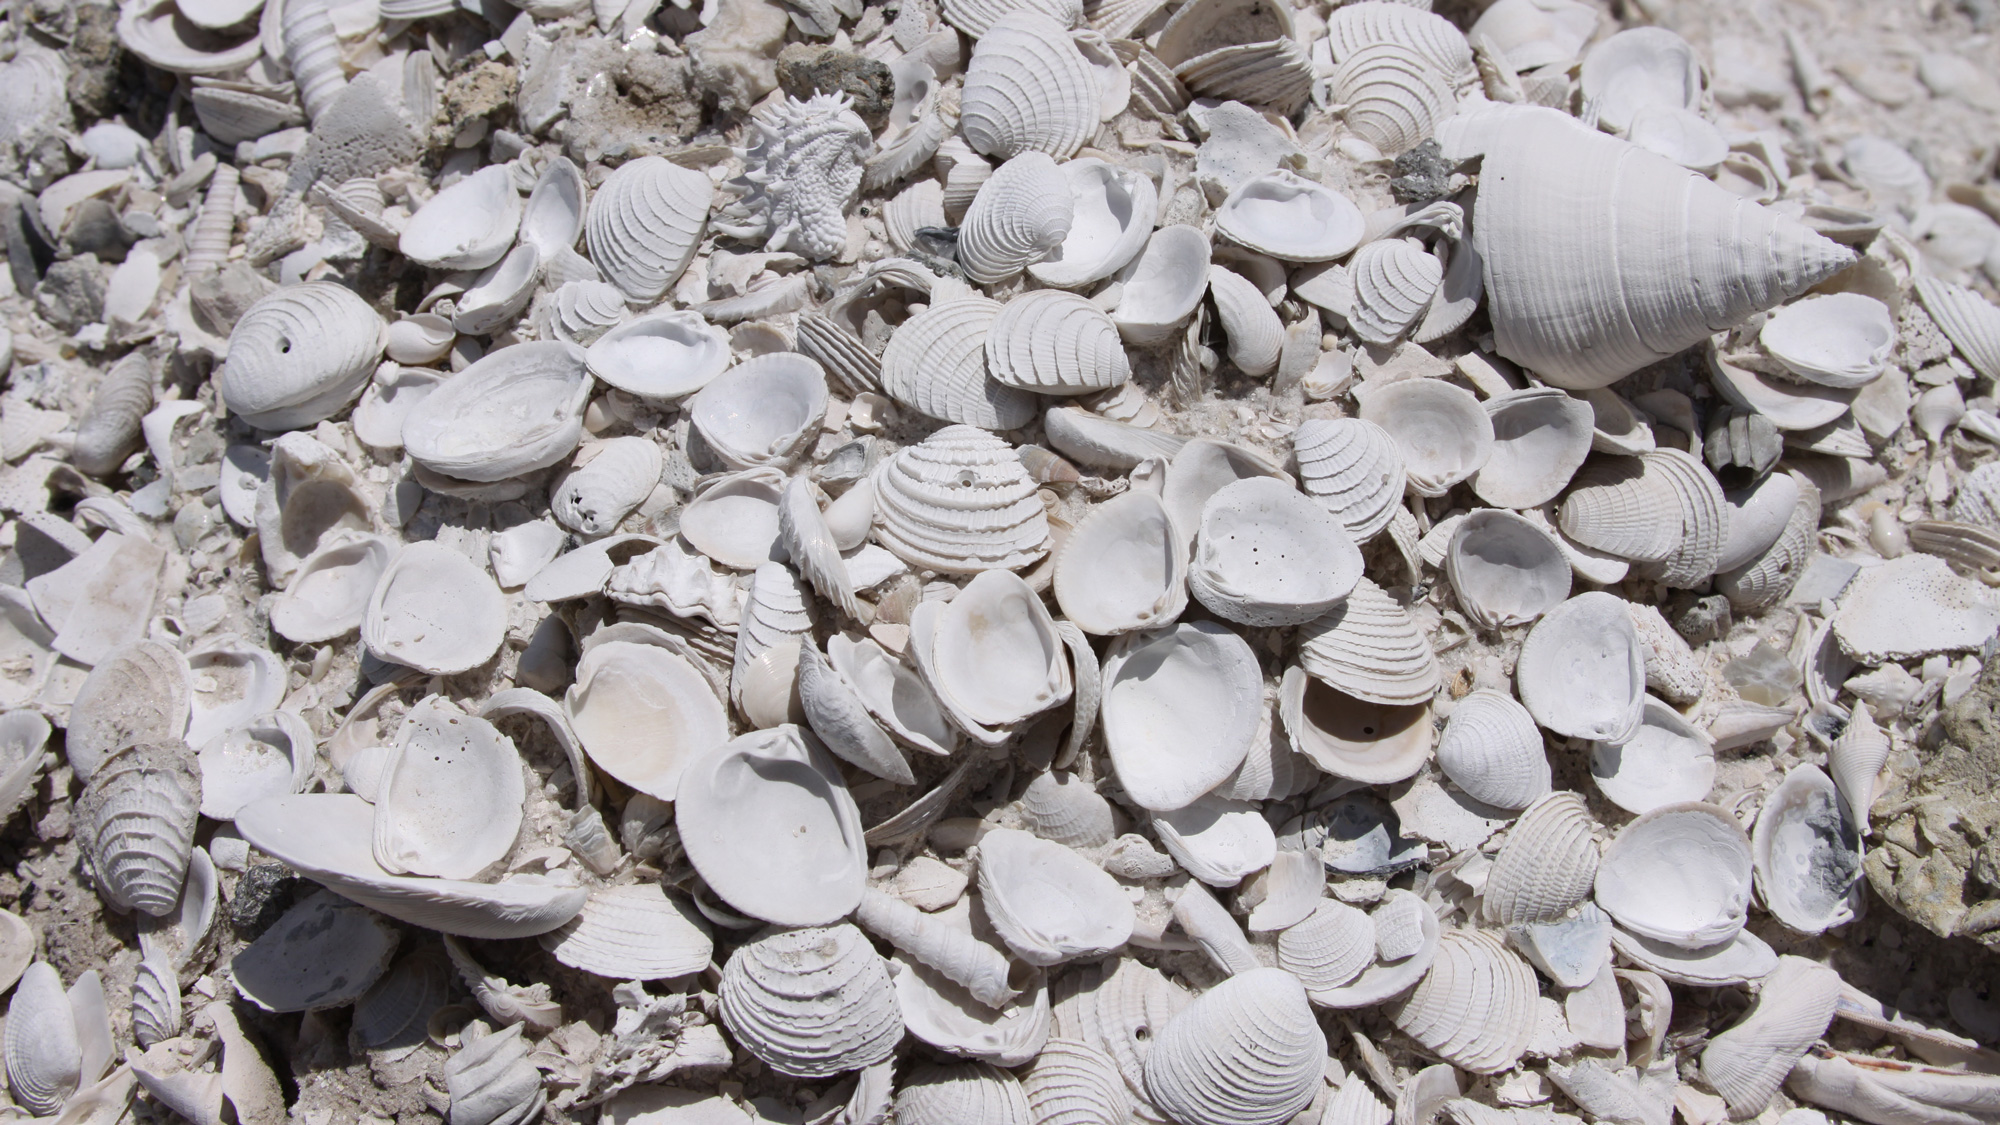 Photograph of disarticulated bivalve fossils in southern Florida.